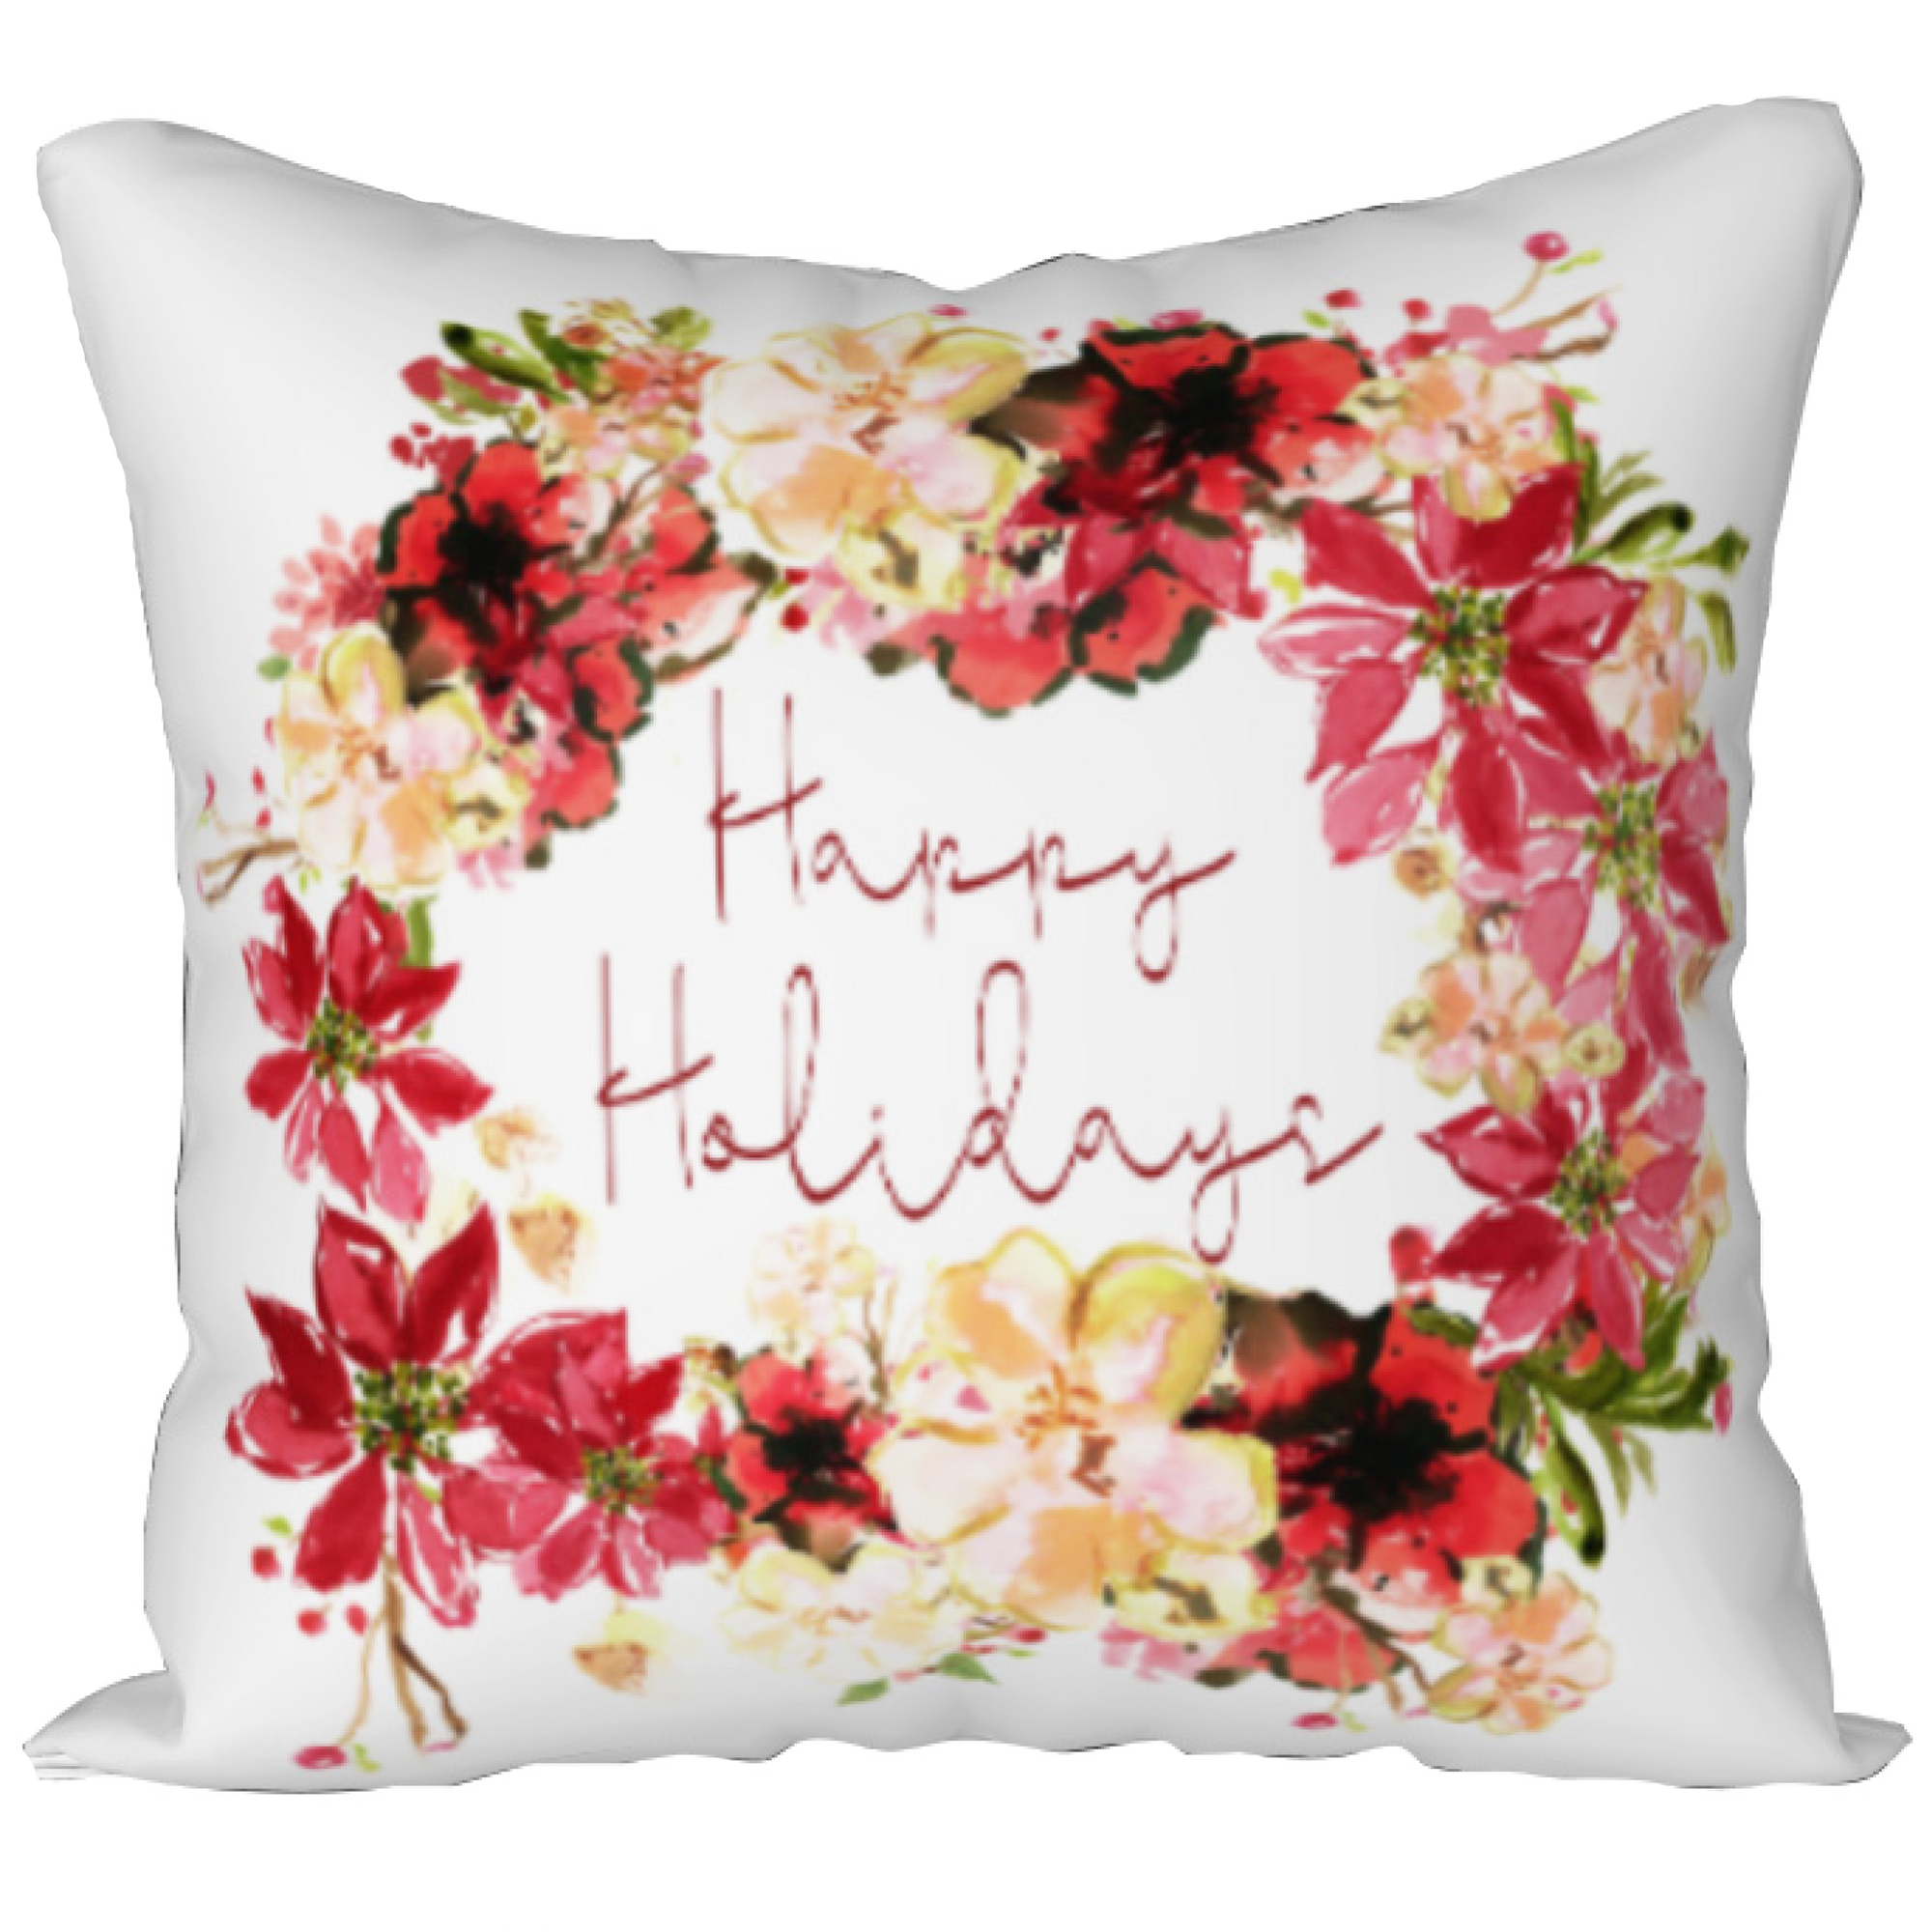 Pretty poinsettias and beige flowers surround the words "Happy Holidays" on this square pillow.  The image is printed on a white background. Perfect for a bedroom, a living room, a soft plush chair or anywhere you might want a pop of holiday cheer!